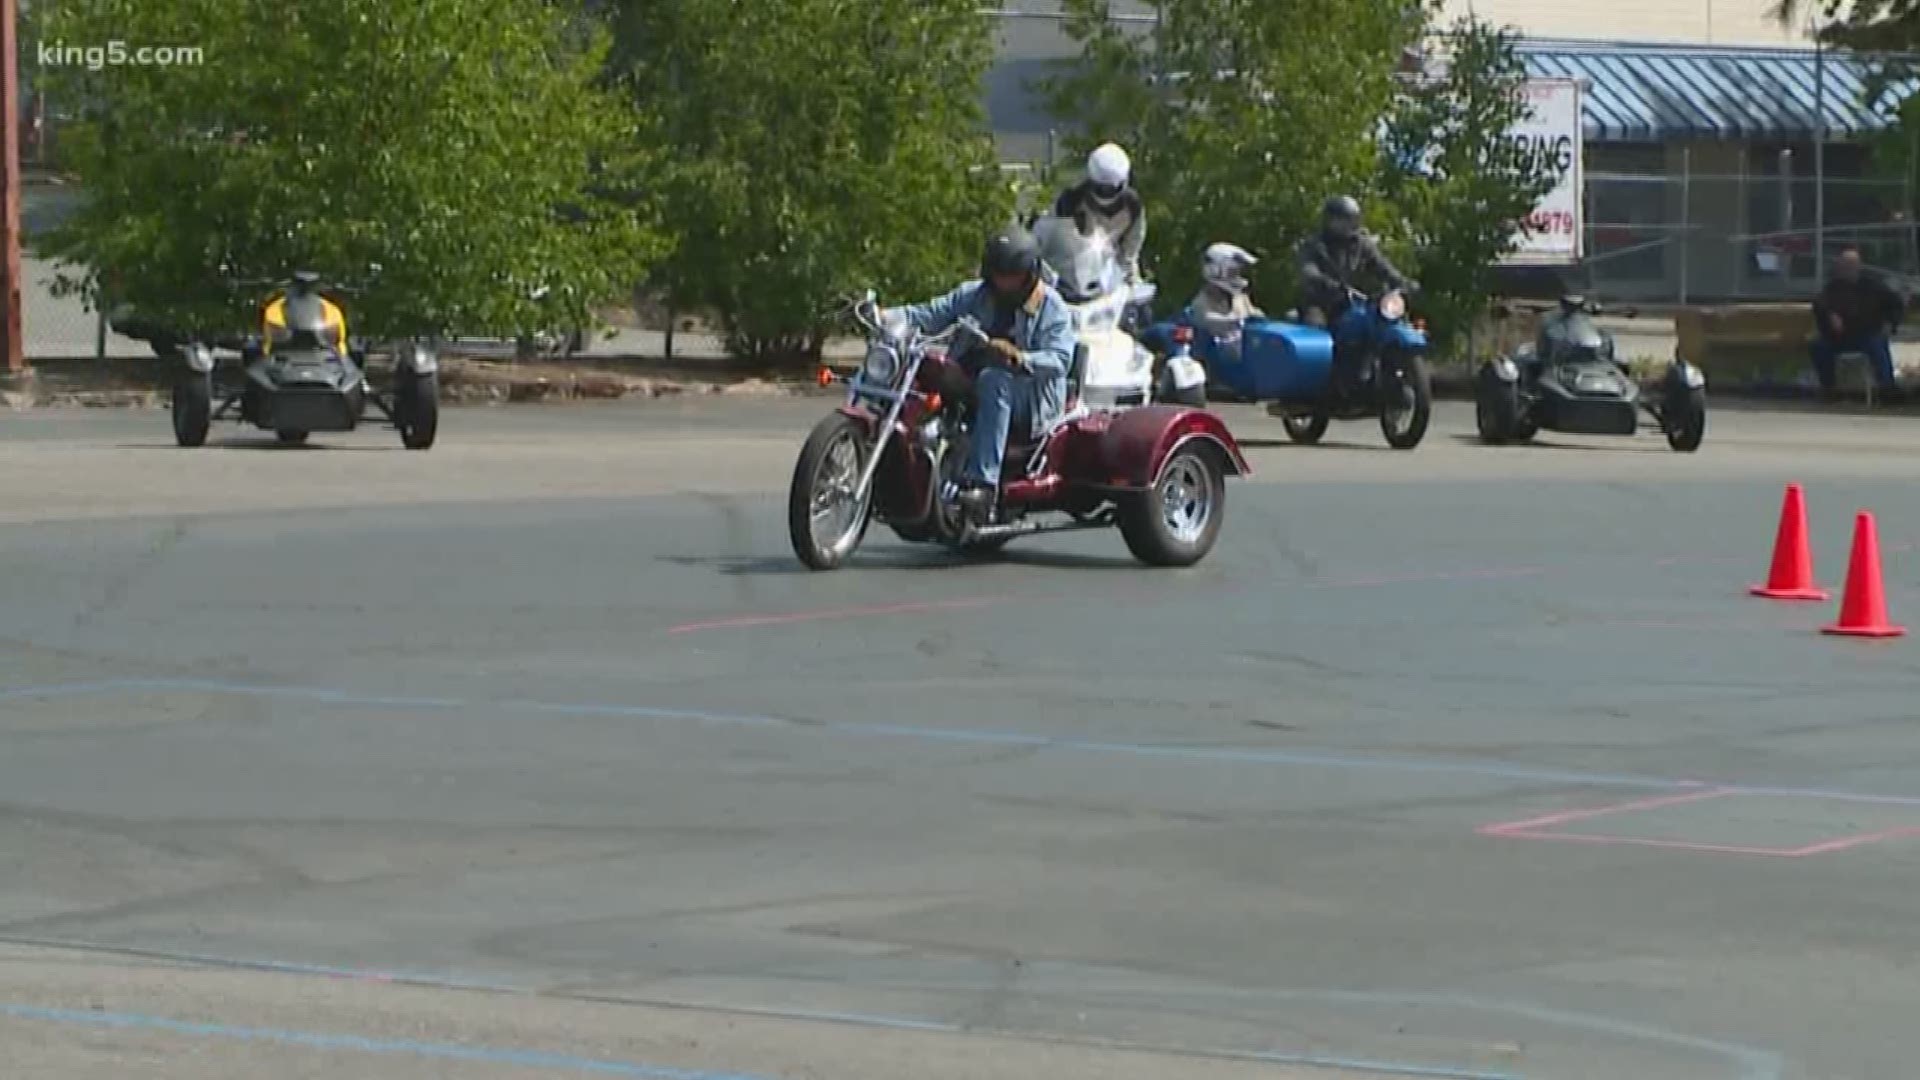 Washington State Patrol urged caution on the roads after 5 riders died in crashes over the weekend.